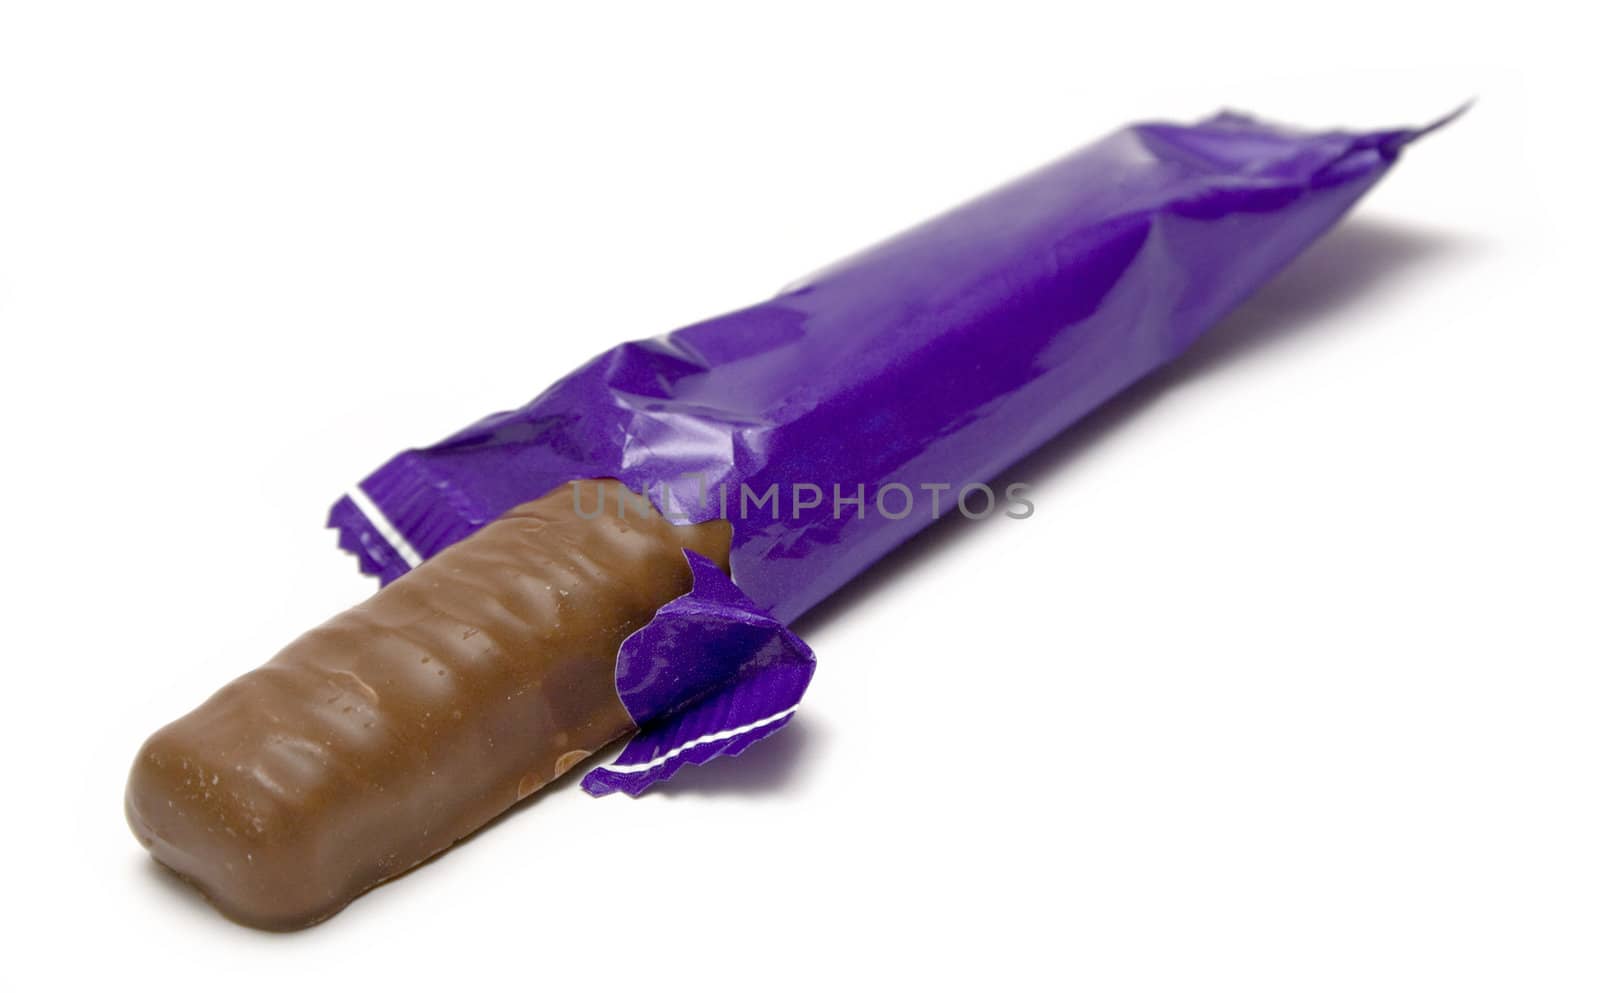 Wrapped Candy Bar by winterling